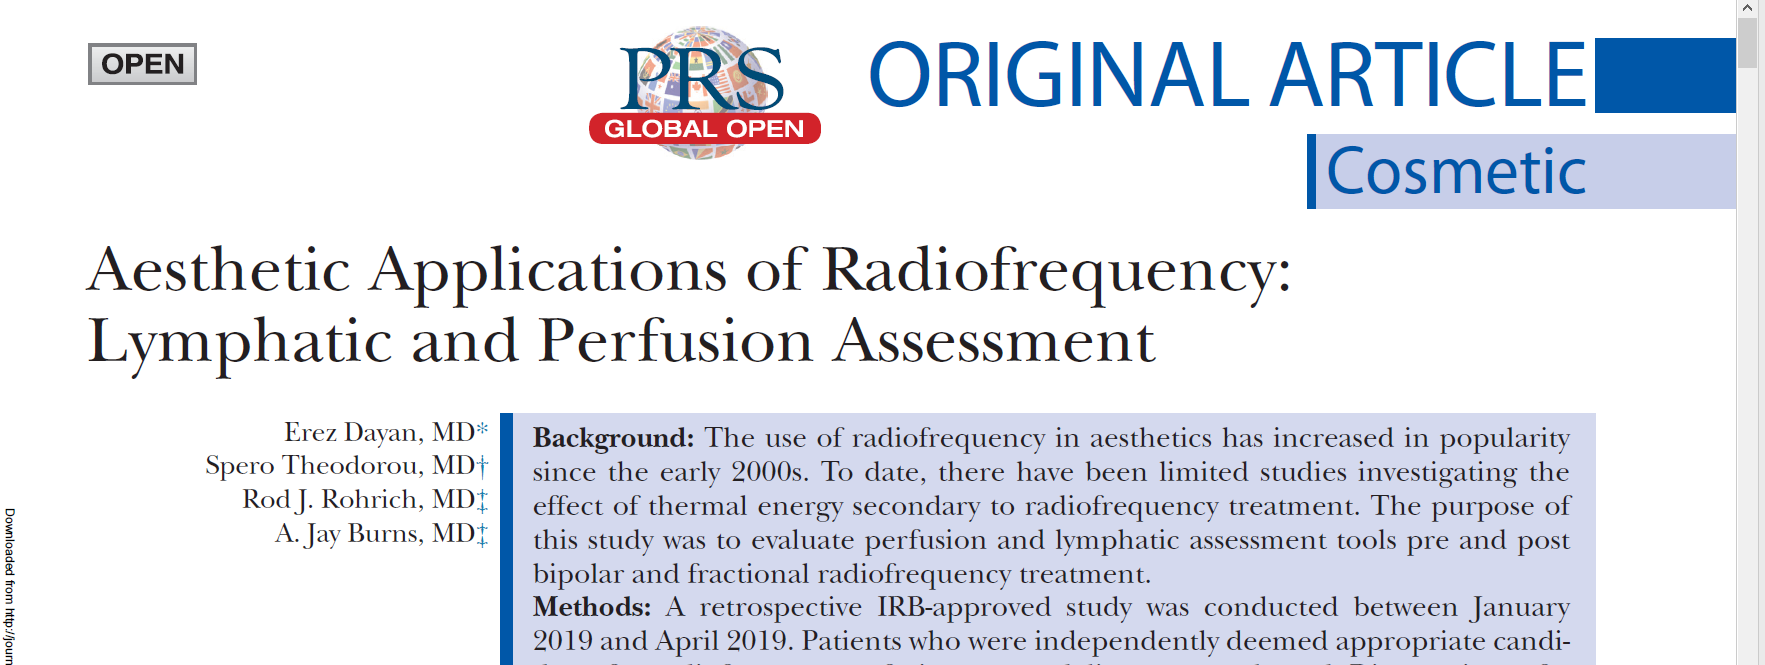 Aesthetic Applications of Radiofrequency: Lymphatic and Perfusion Assessment